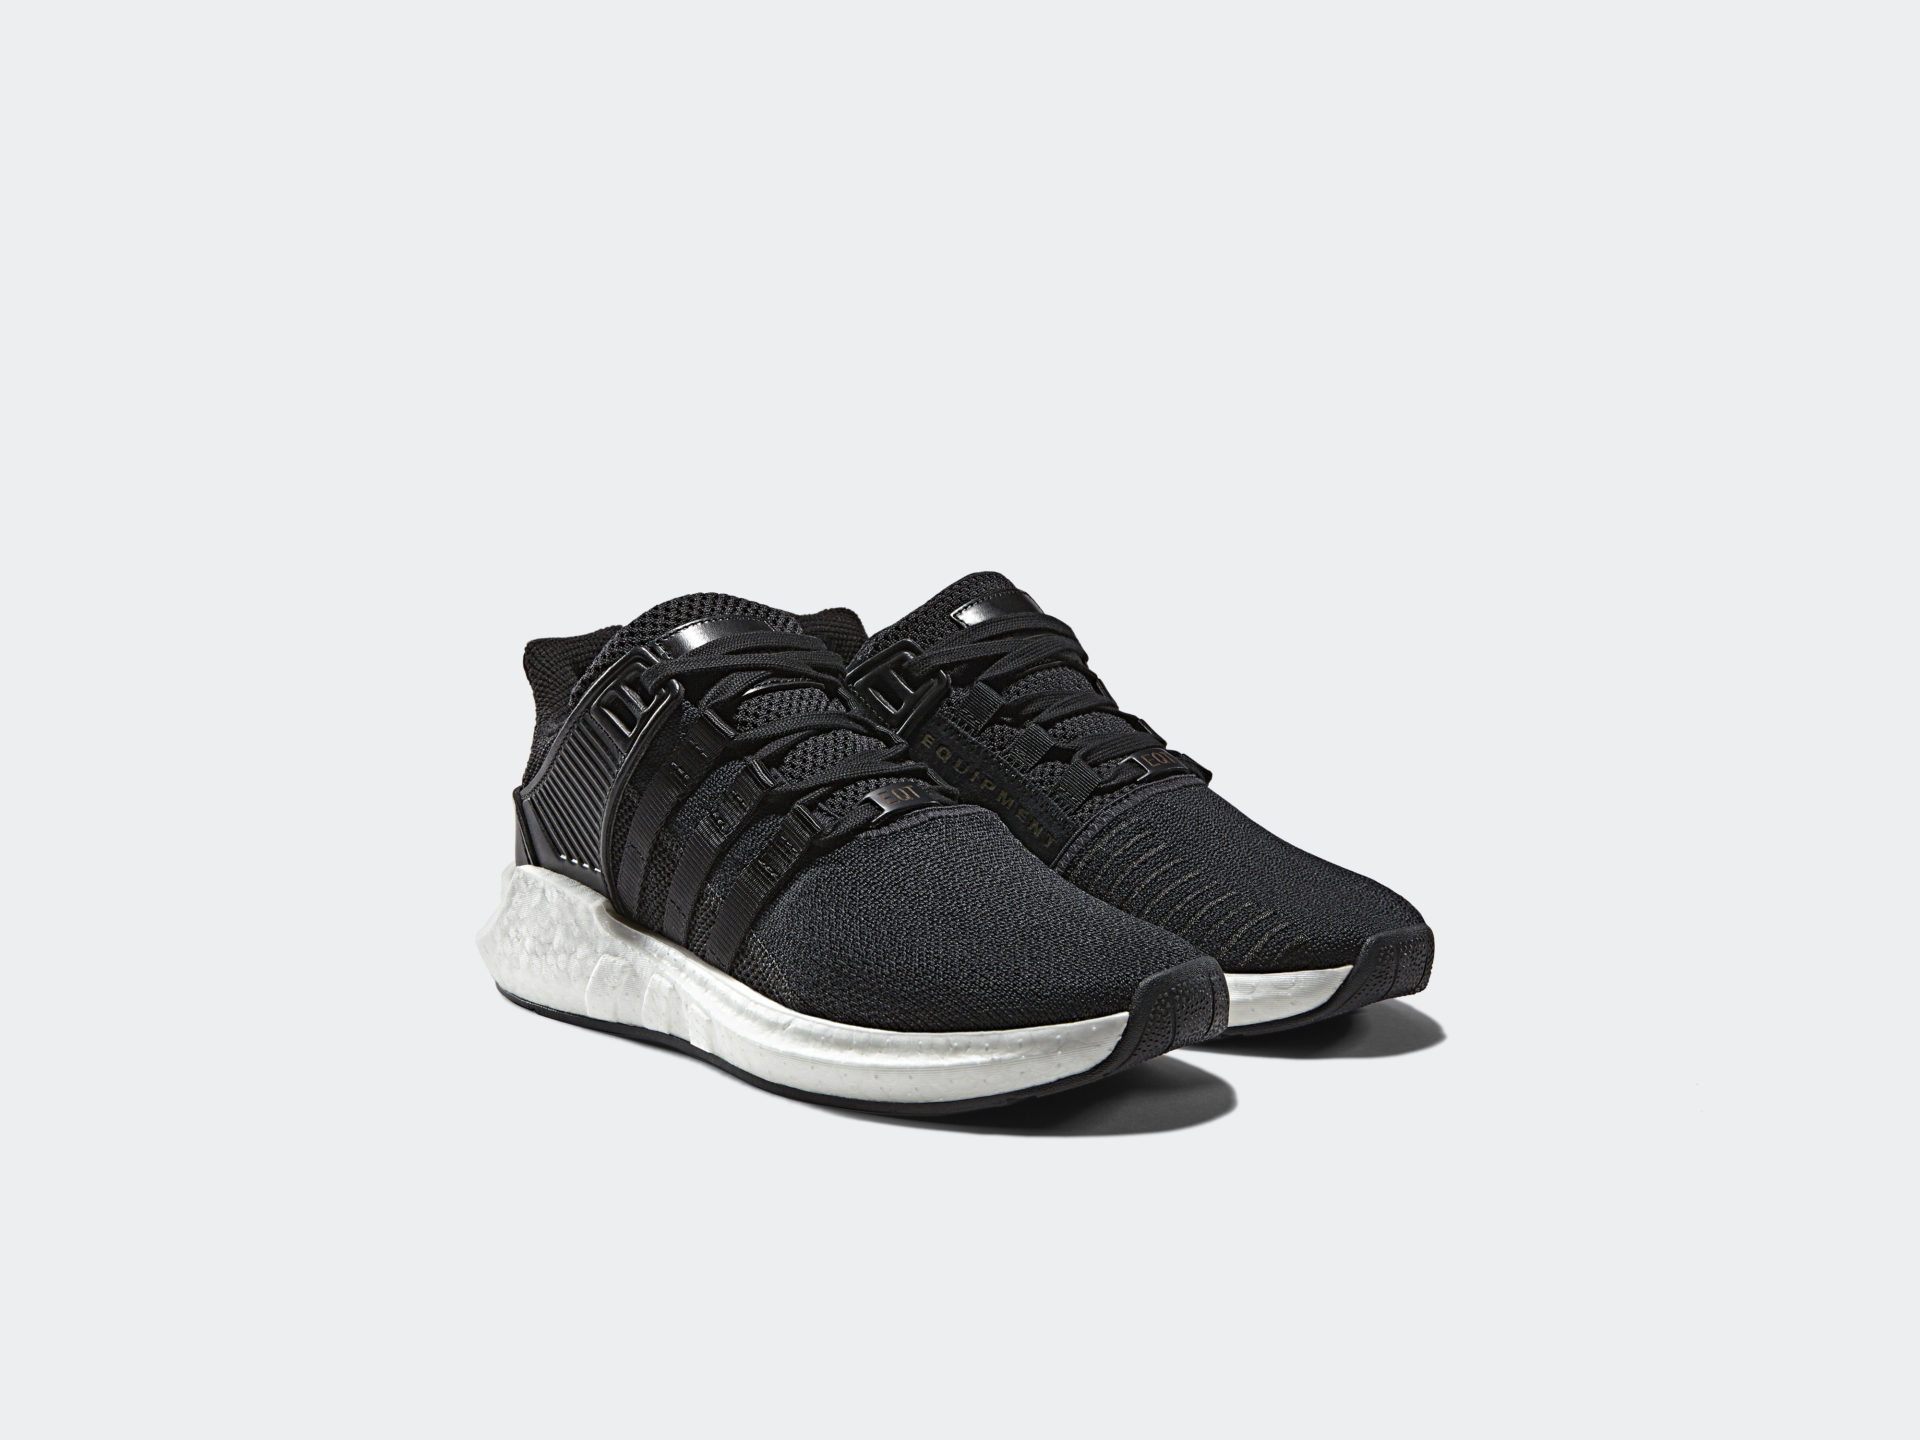 adidas EQT Support 93/17 "Milled Leather"